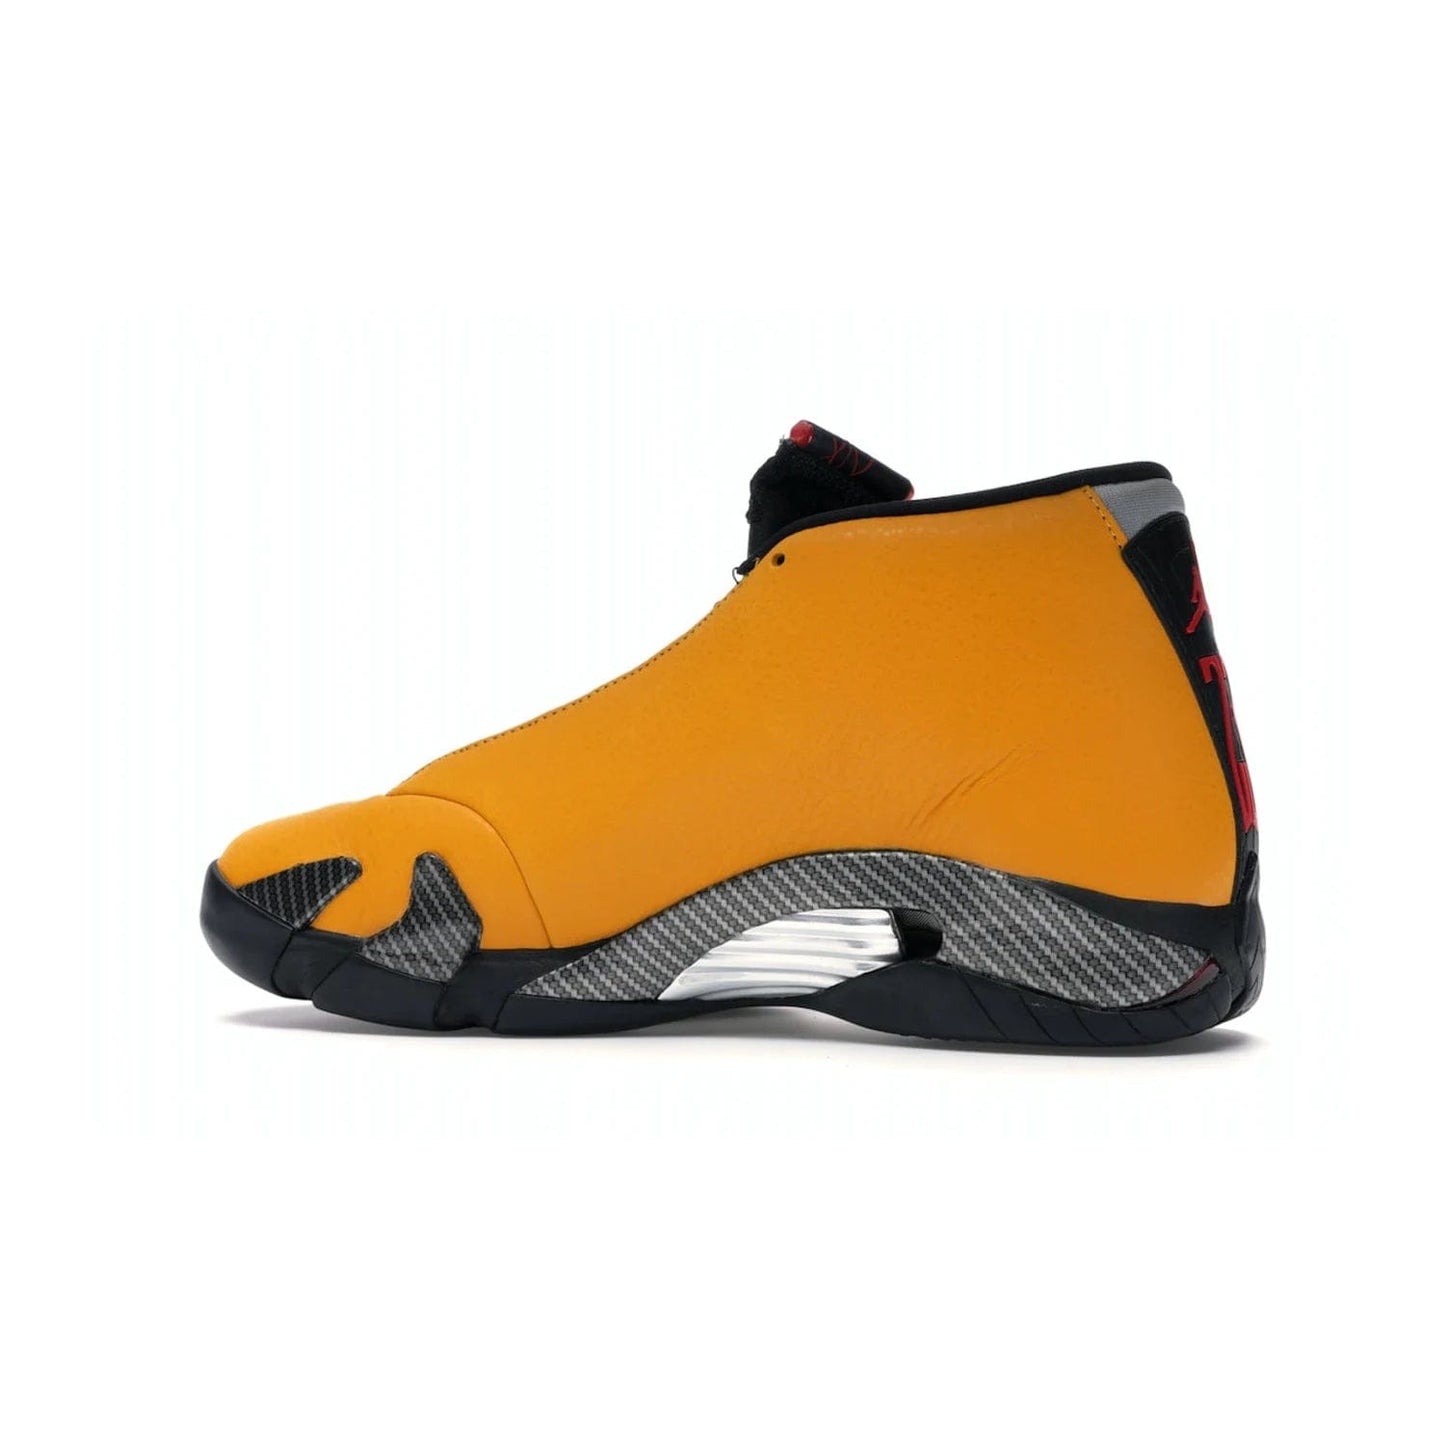 Jordan 14 Retro University Gold - Image 21 - Only at www.BallersClubKickz.com - Air Jordan 14 Retro University Gold: High-quality leather sneaker with Jumpman, tongue & heel logos. Zoom Air units & herringbone traction for superior comfort. University Gold outsole for stylish streetwear.